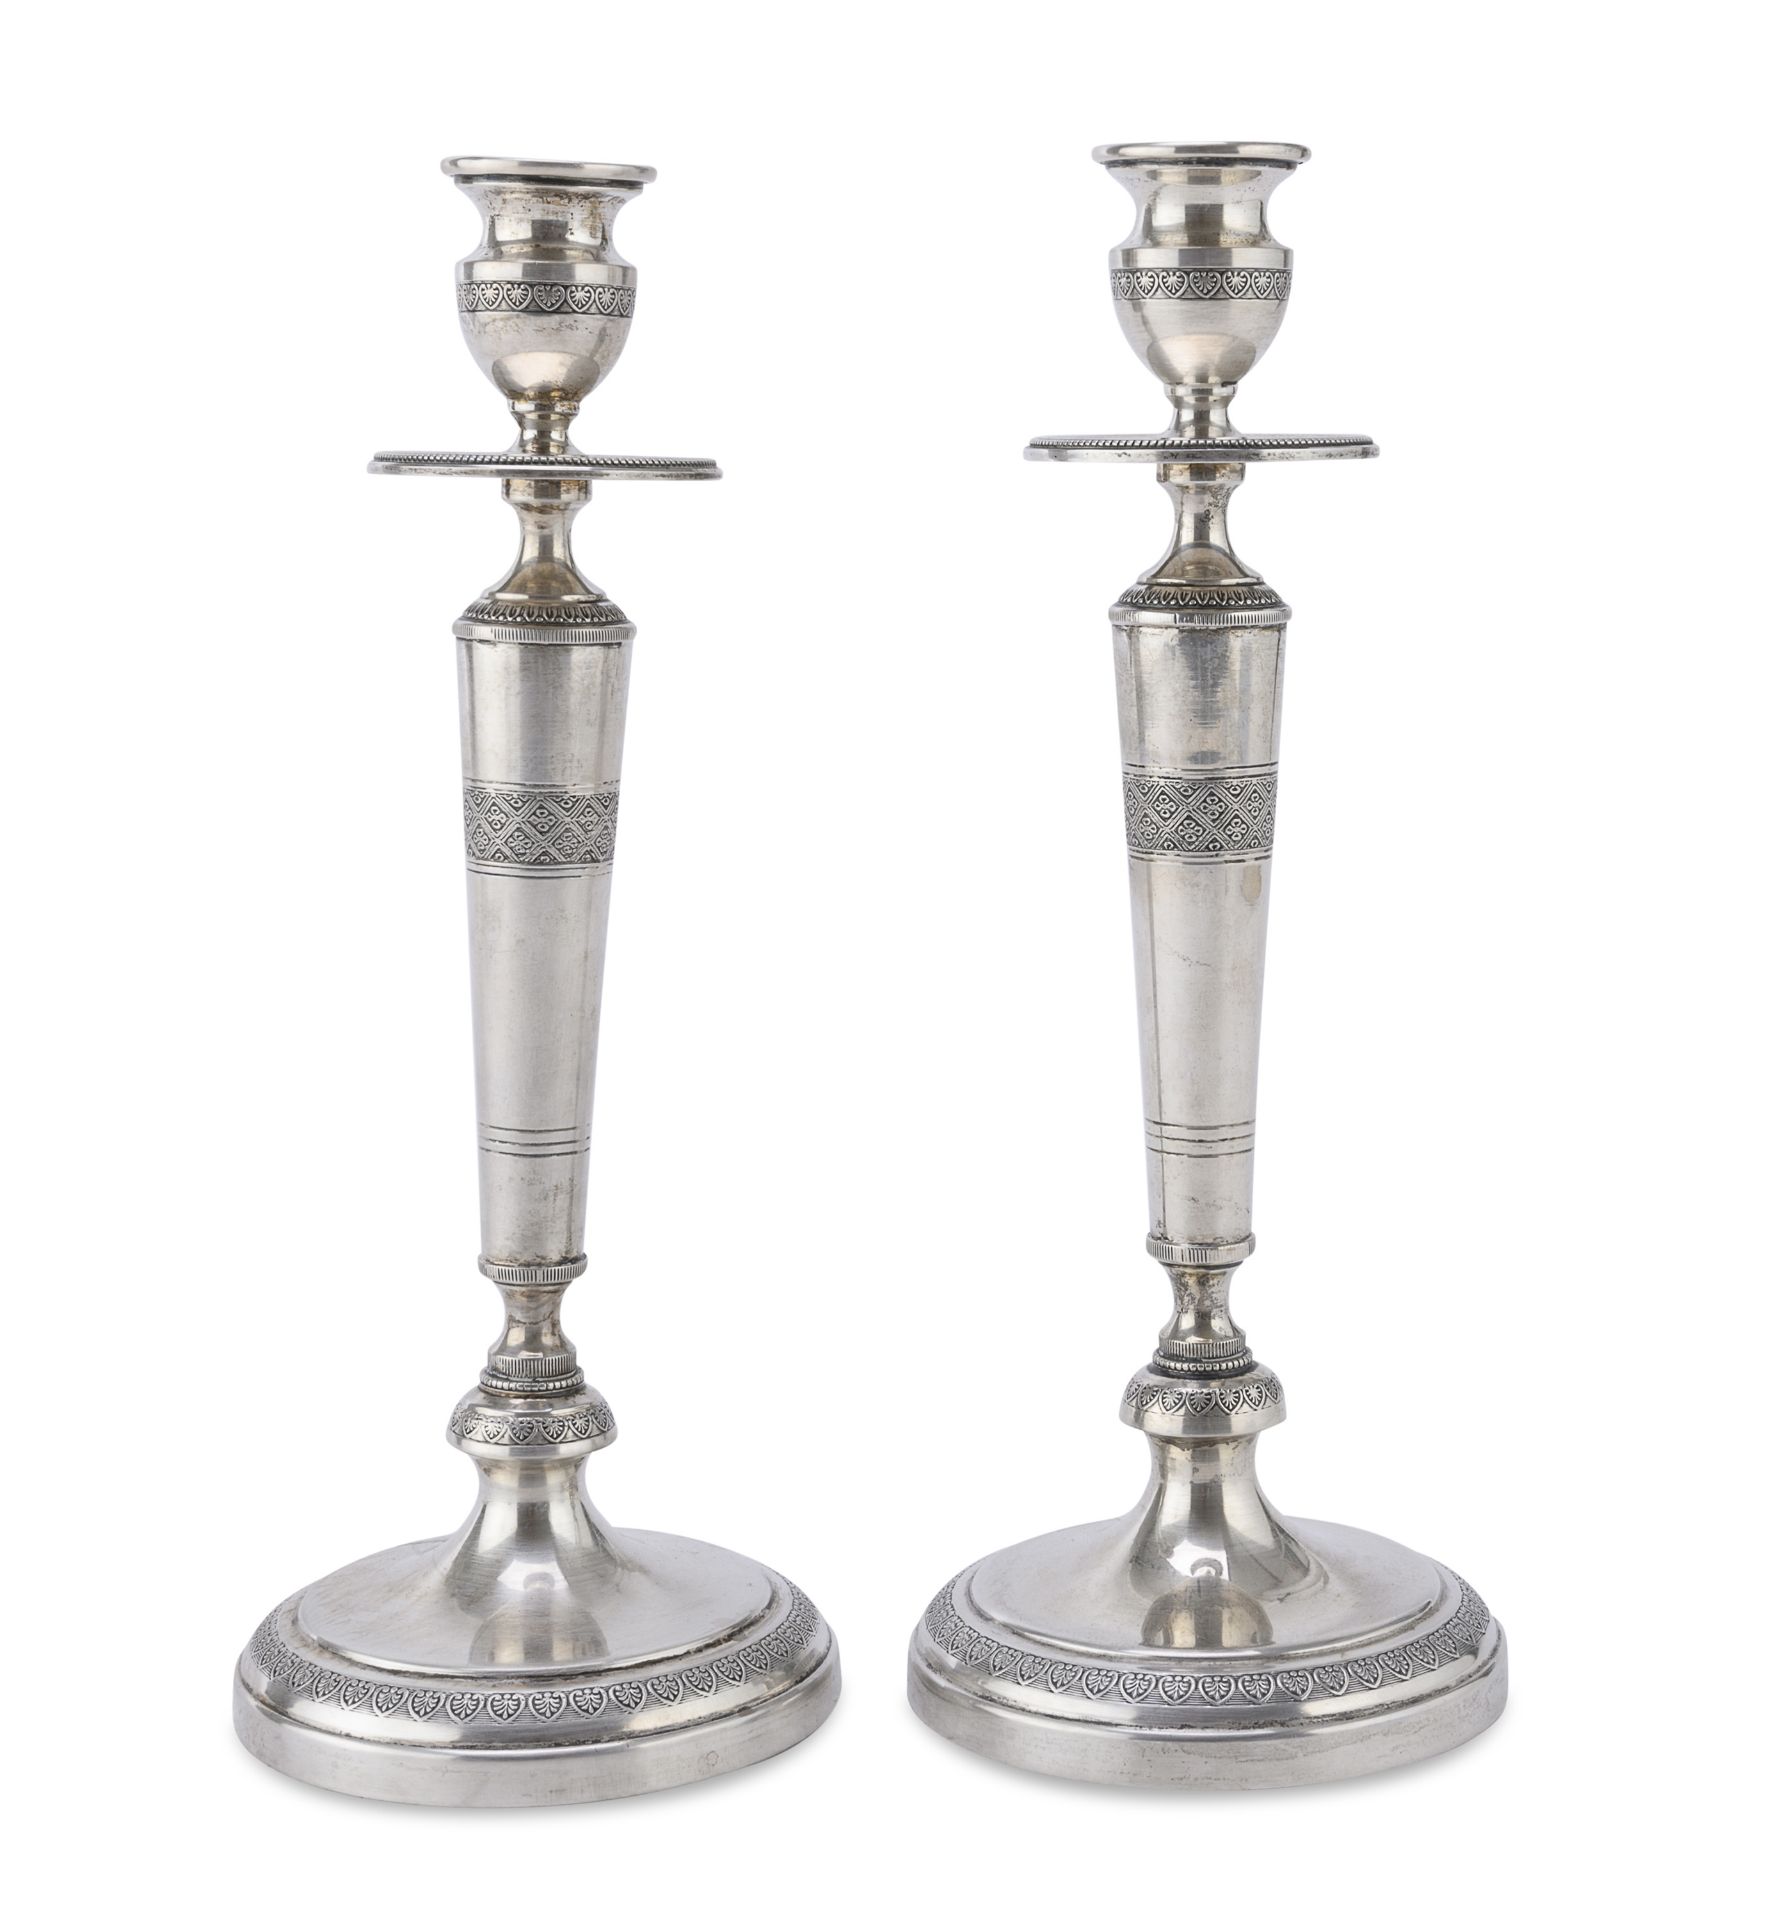 PAIR OF SILVER CANDLESTICKS ITALY 1930 ca.